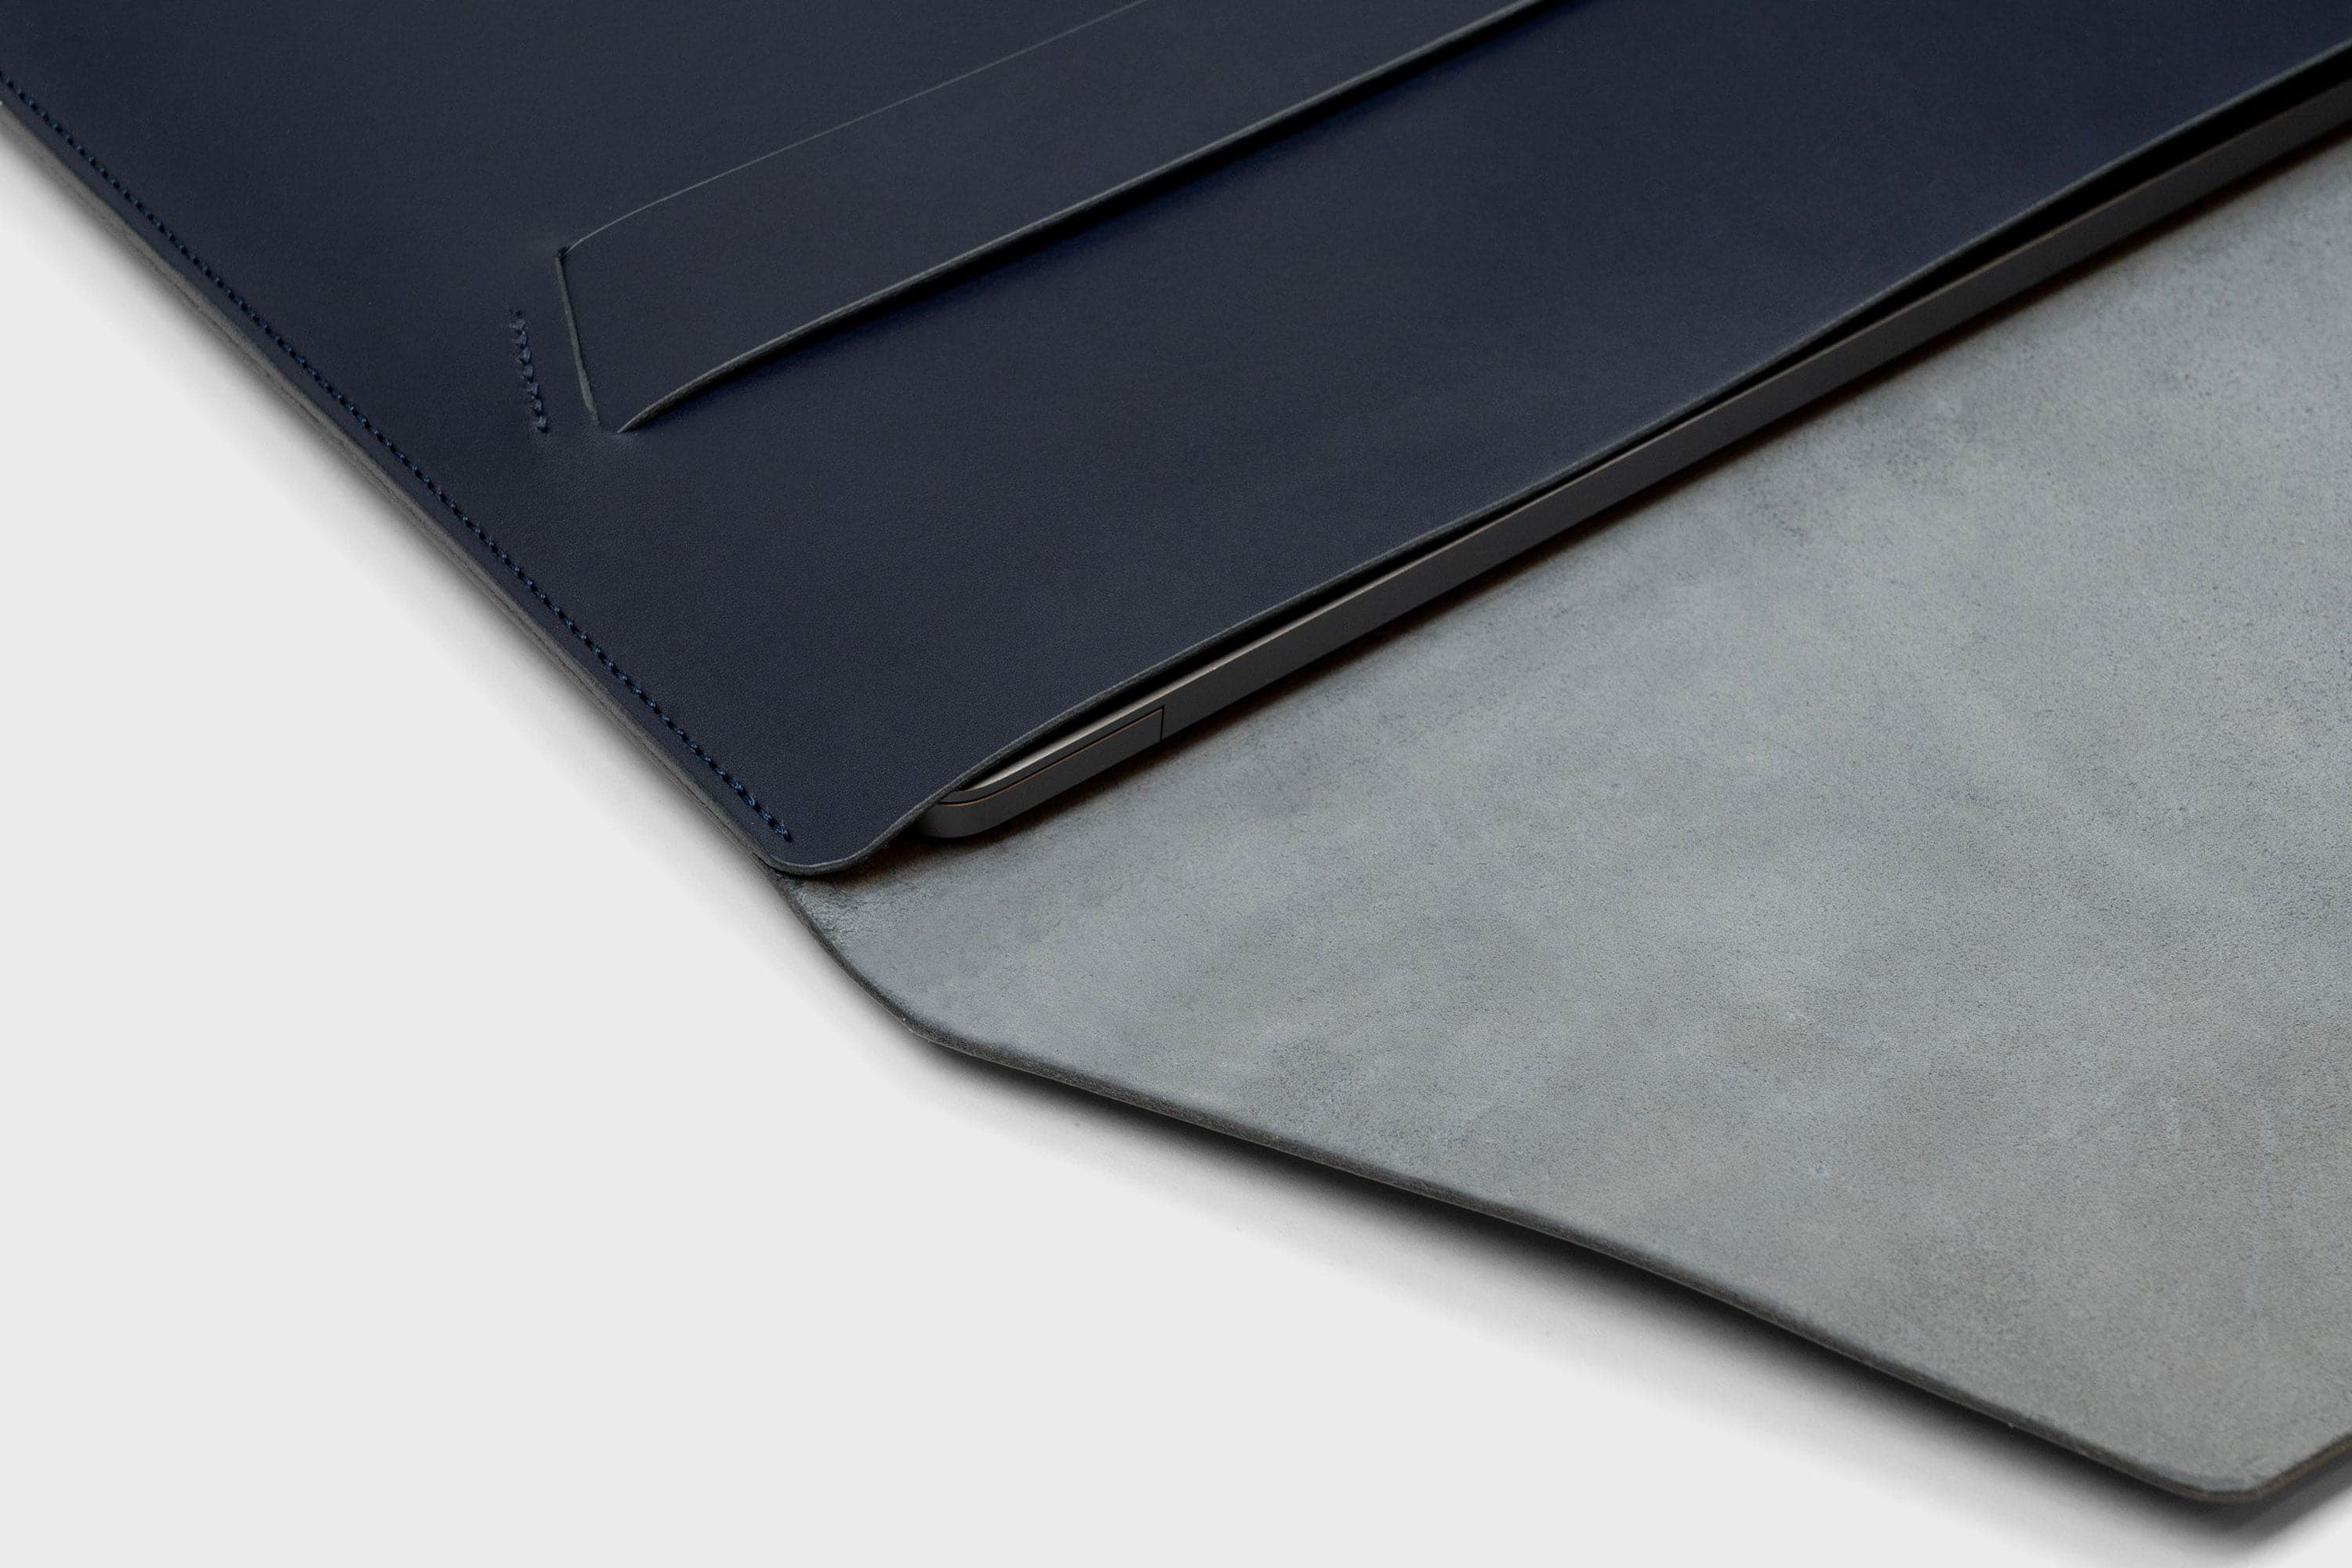 MacBook Pro 14 Inch Leather Vegetable Tanned Leather Sleeve Dark Marine Blue Color Handmade and Designed By Manuel Dreesmann Atelier Madre Barcelona Spain